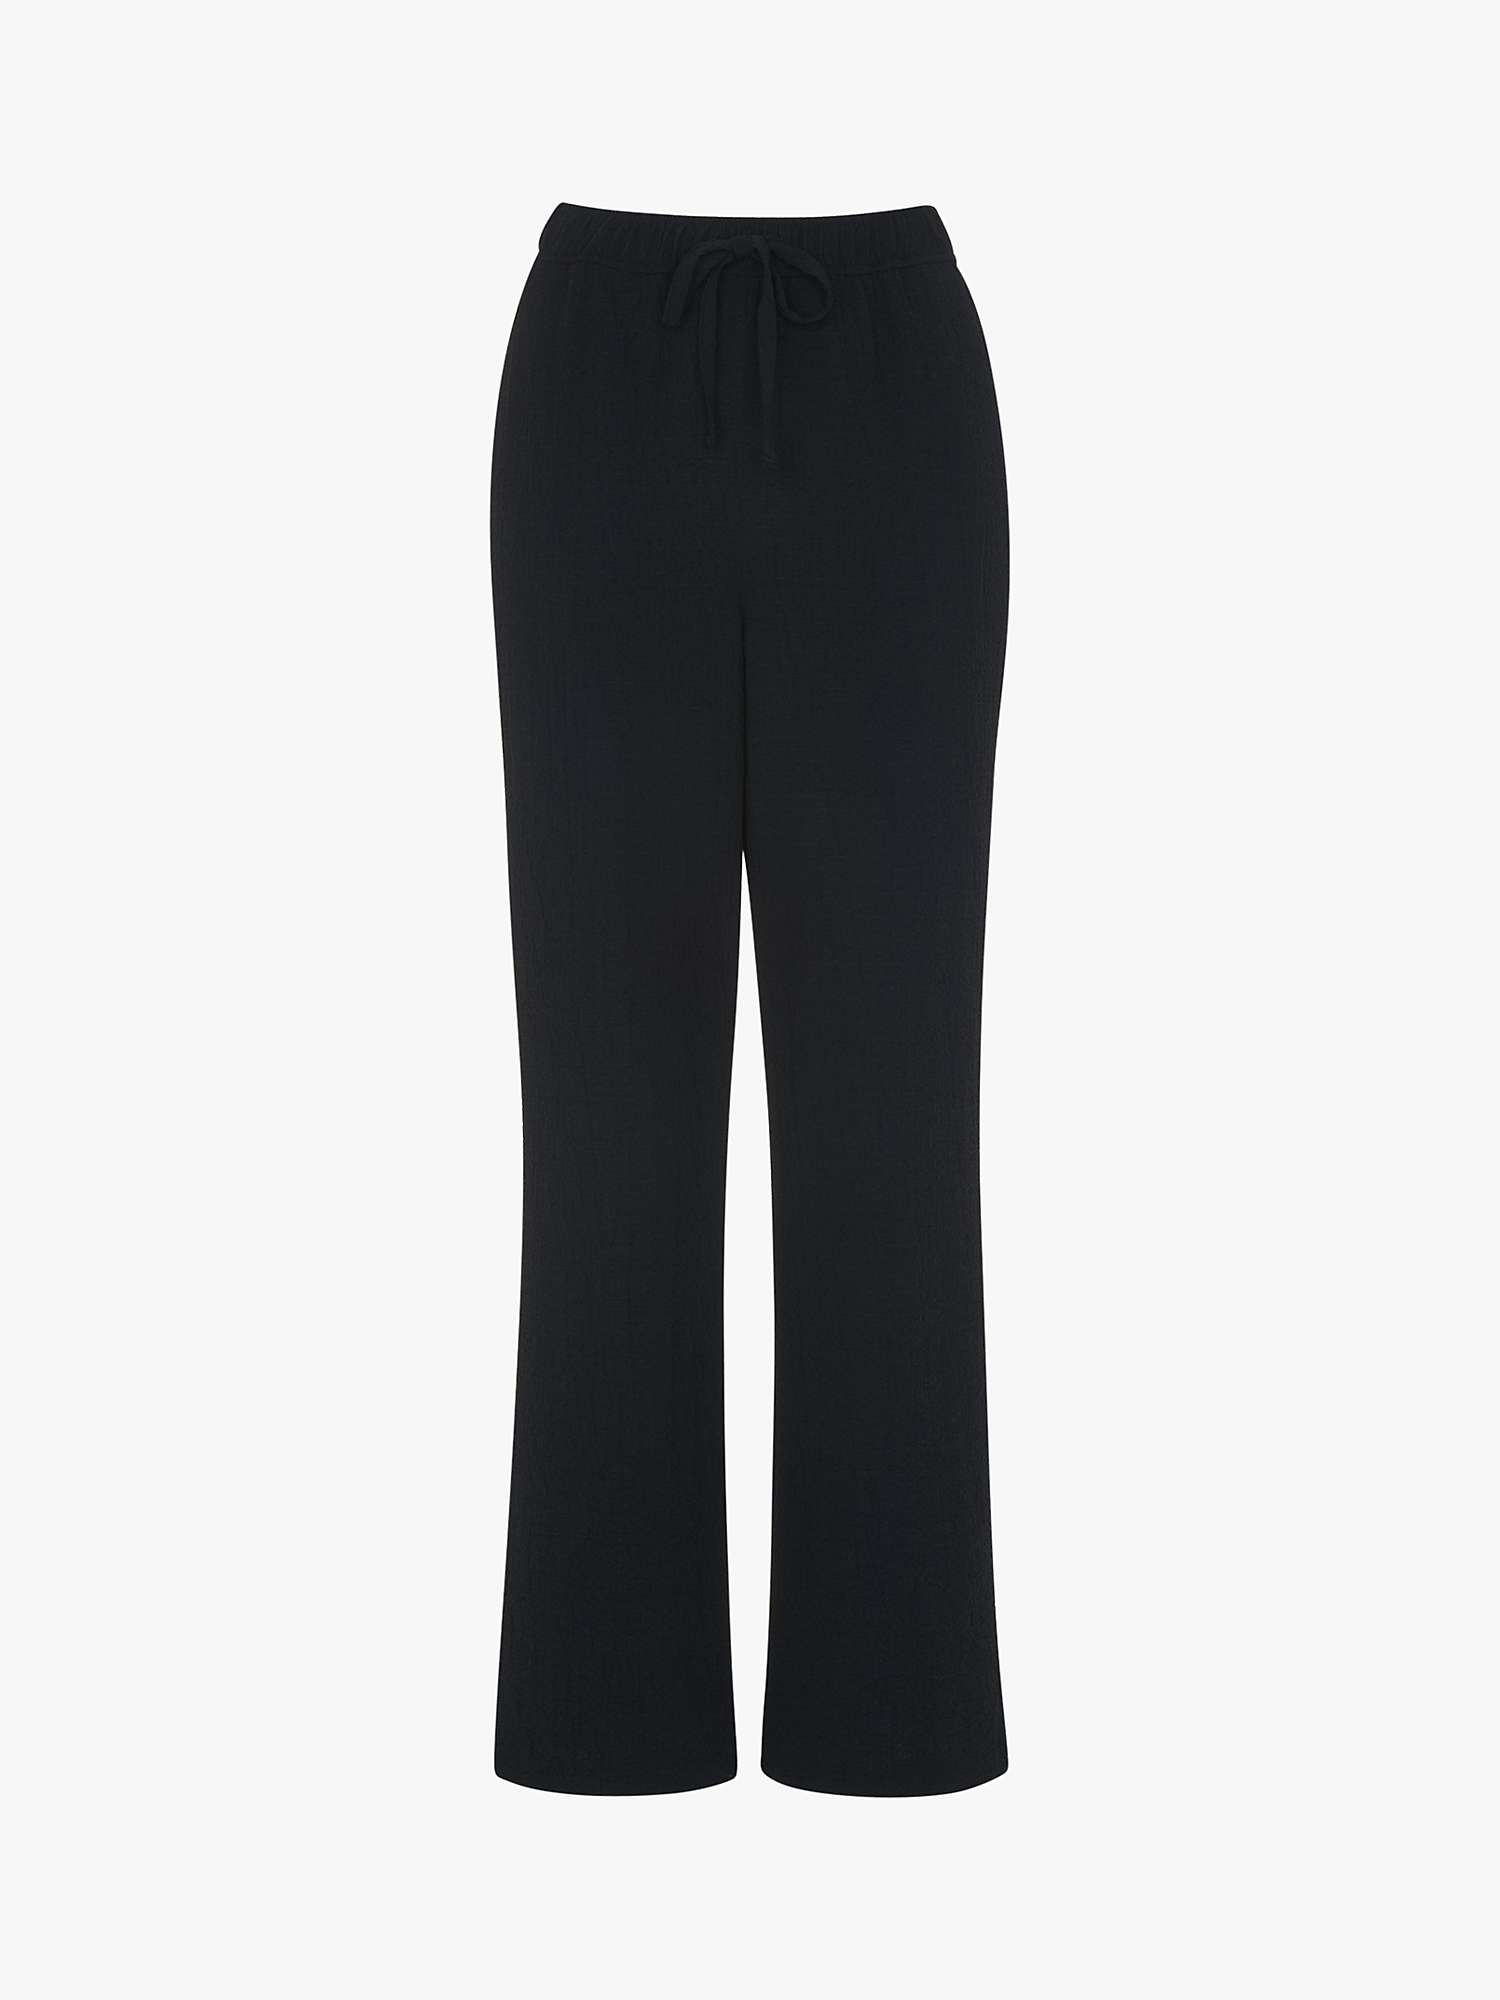 Whistles Luna Textured Trousers, Black at John Lewis & Partners